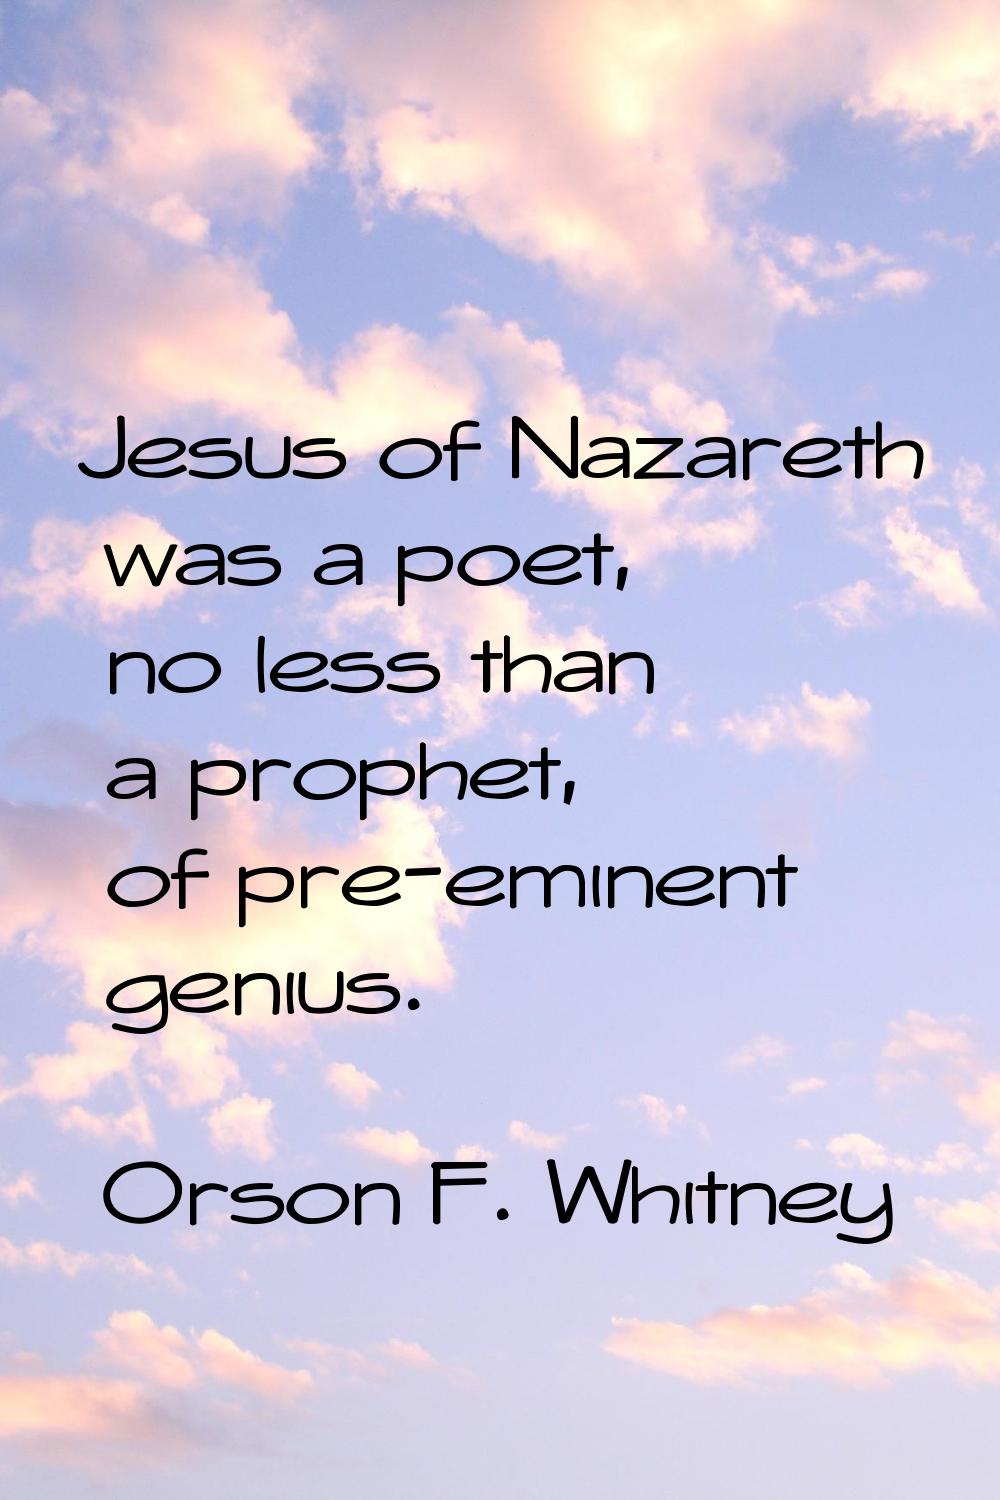 Jesus of Nazareth was a poet, no less than a prophet, of pre-eminent genius.